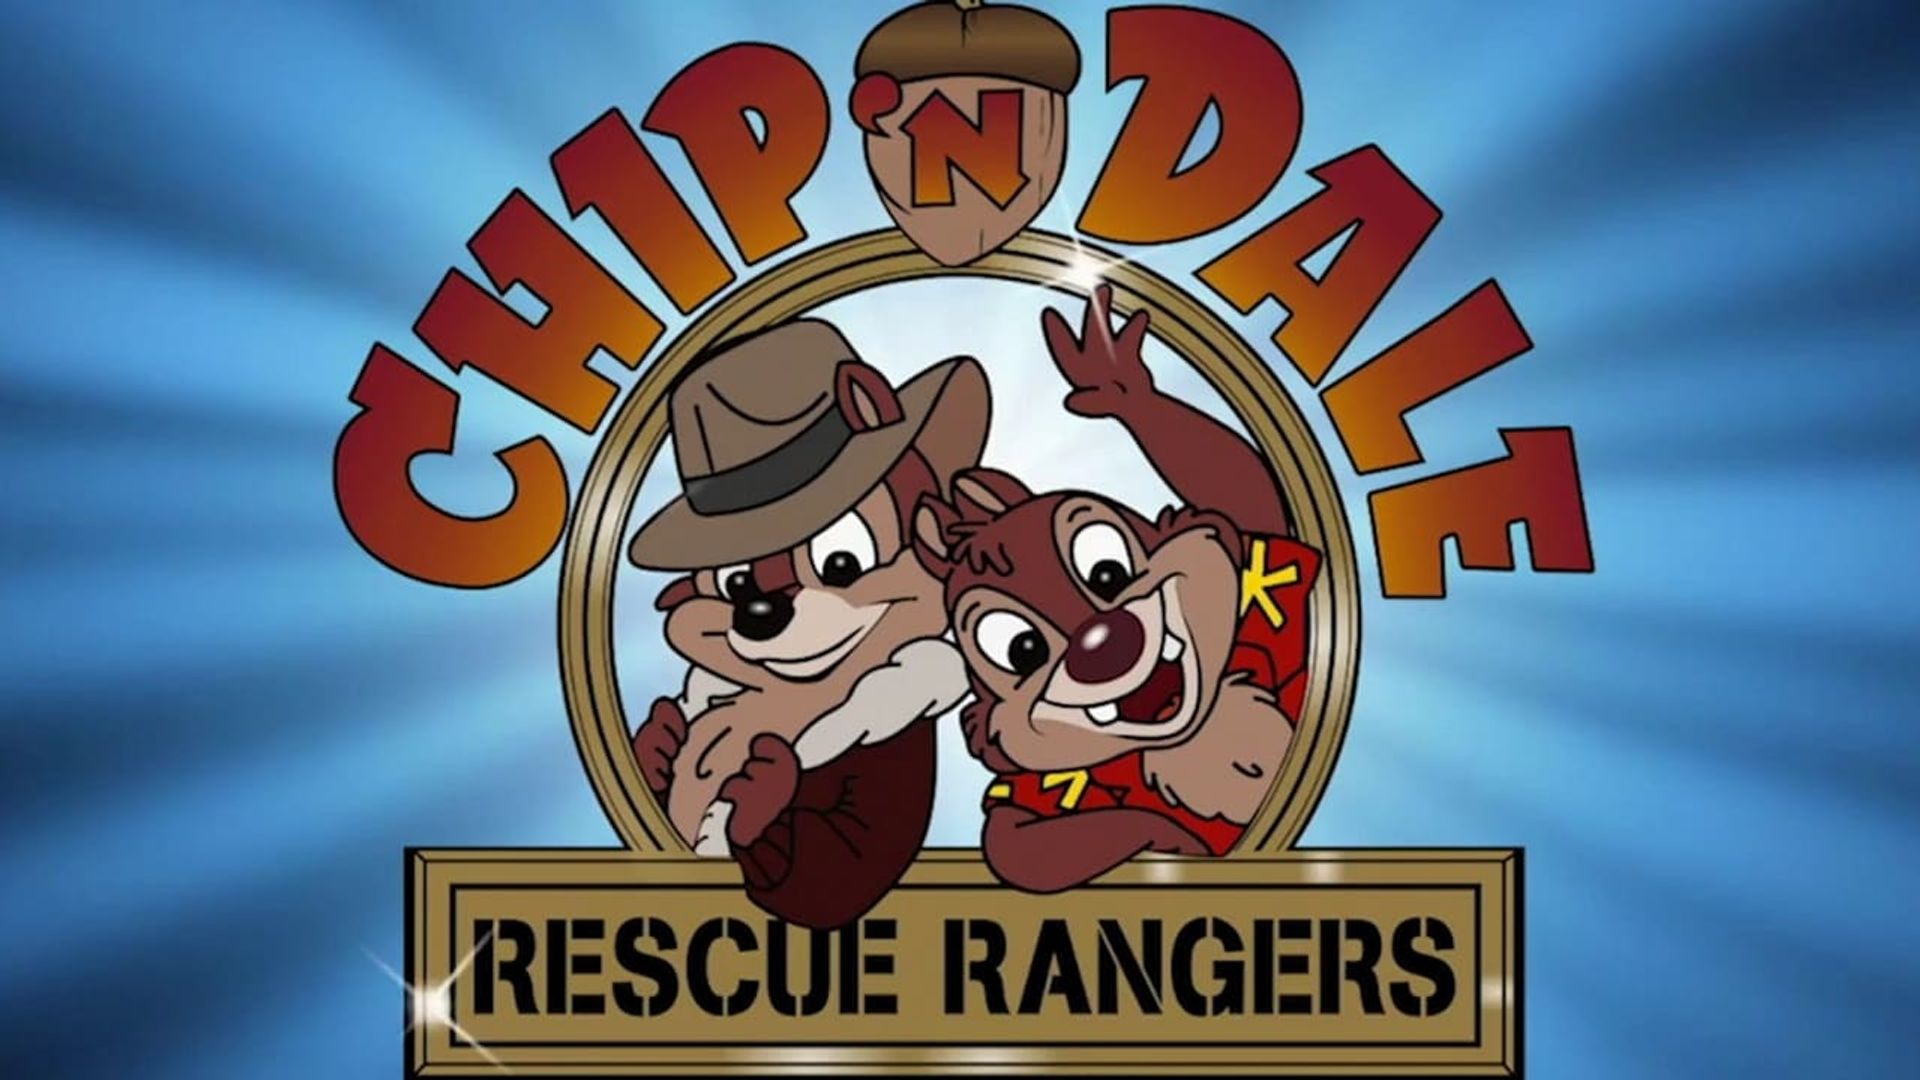 Chip 'n' Dale's Rescue Rangers to the Rescue background